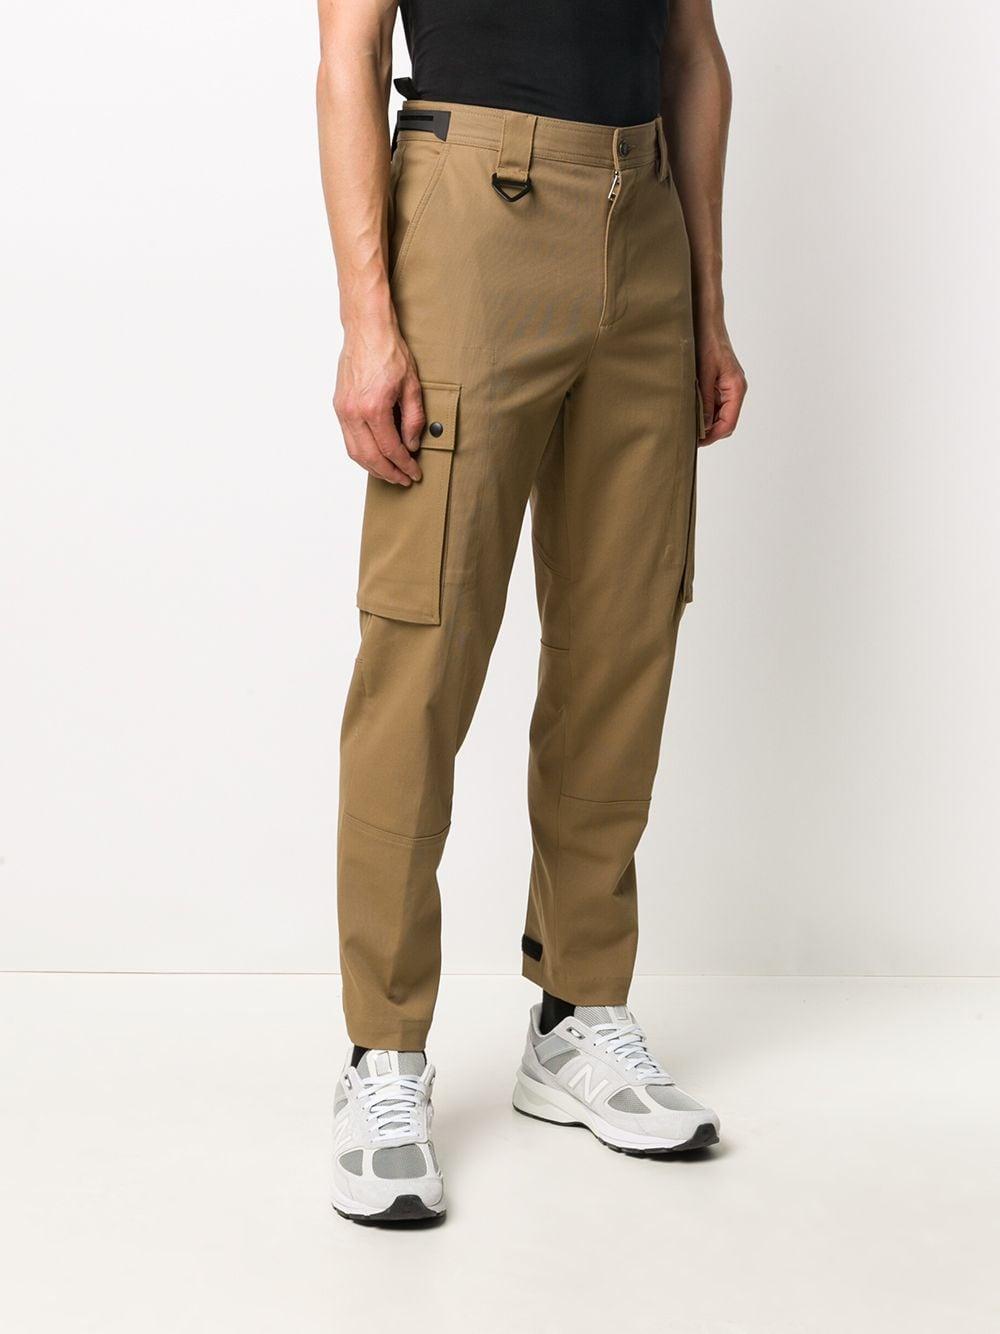 DIESEL Cavarly Twill Cargo Pants in Brown for Men - Lyst